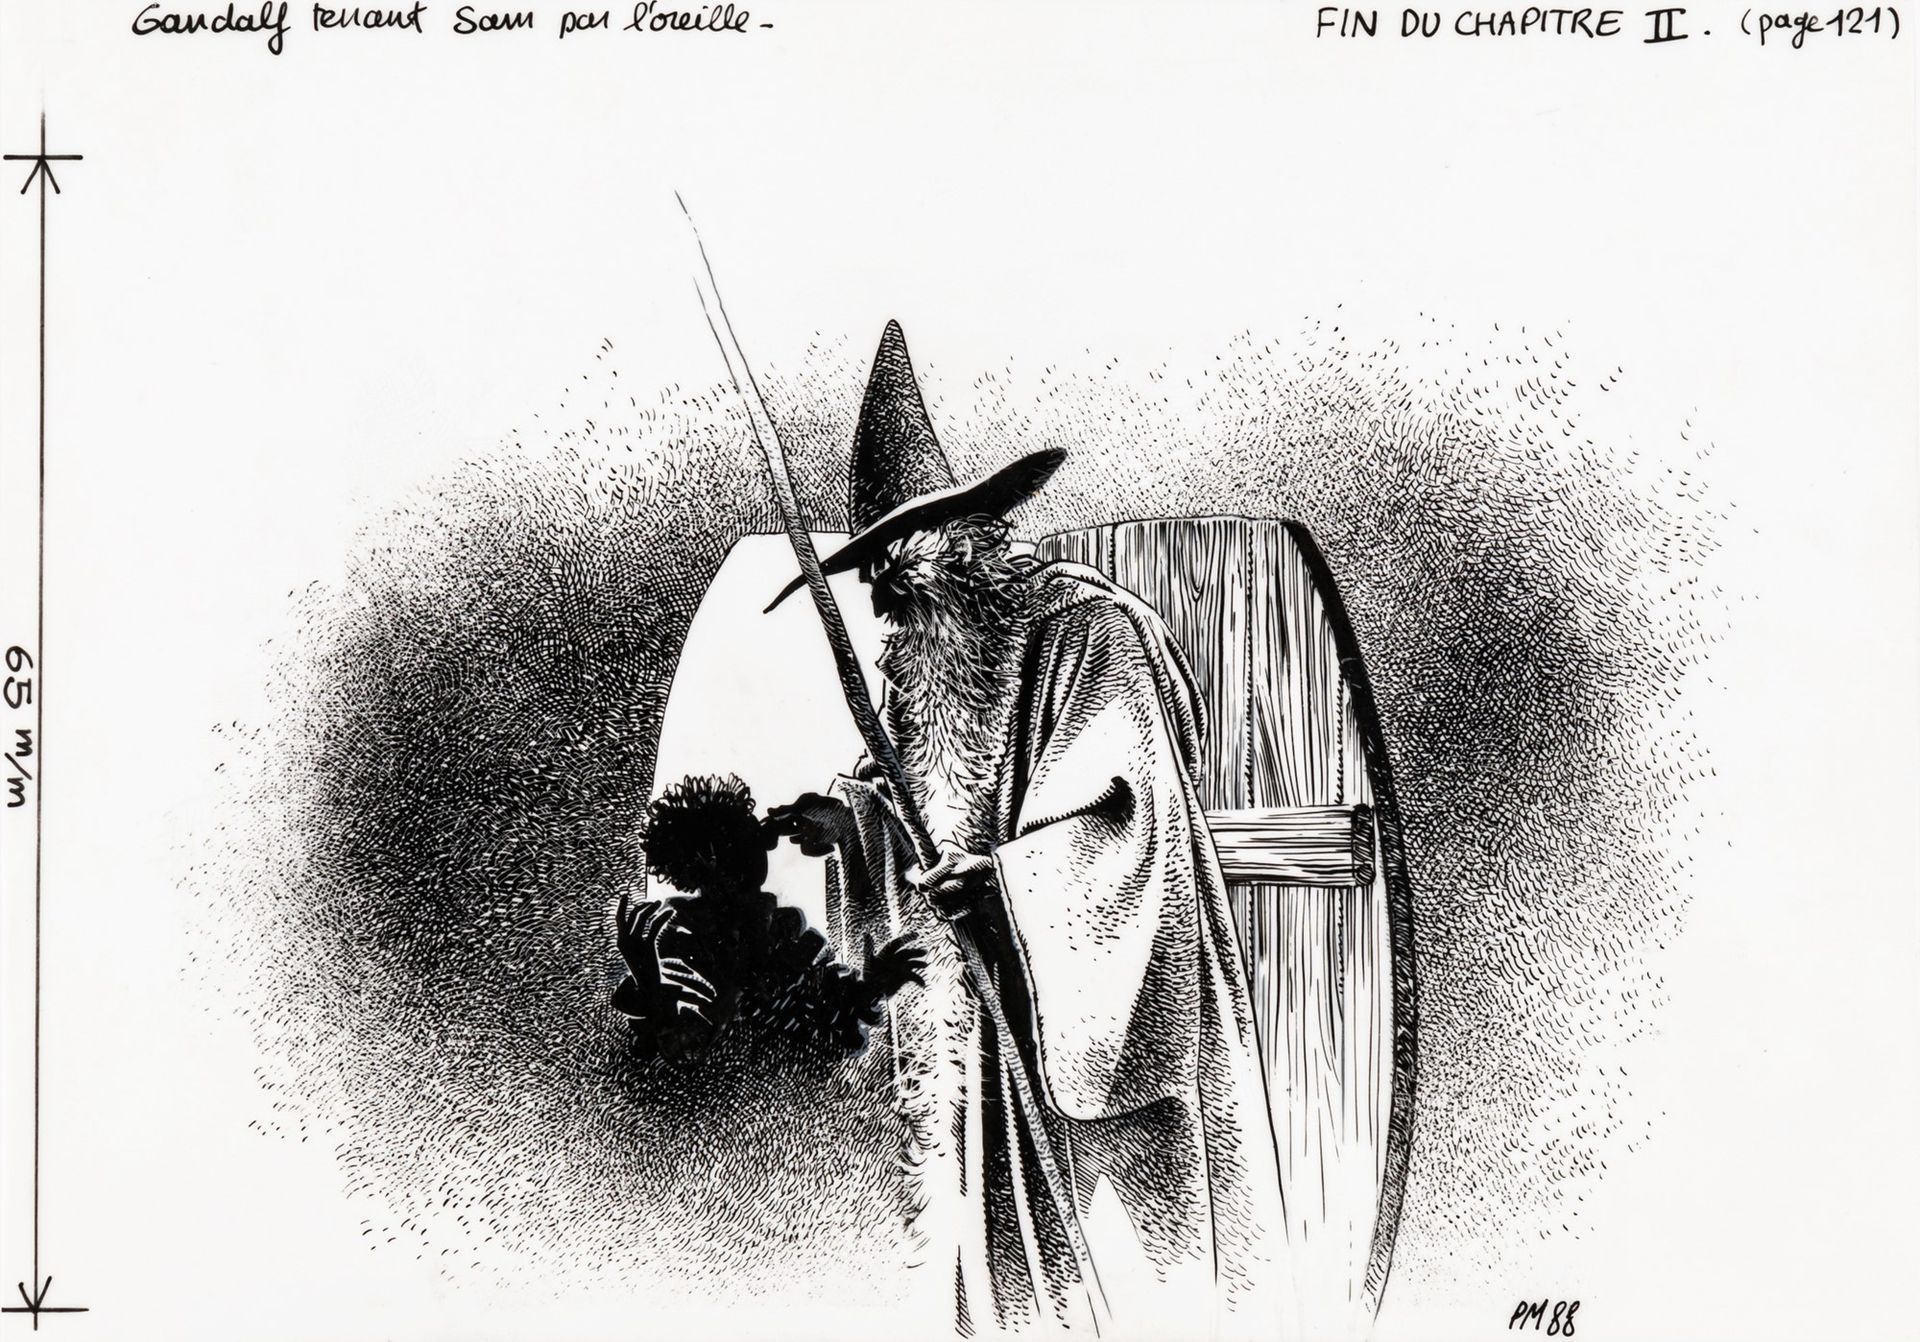 Philippe Munch Gandalf holds Sam by the ear, 1988

ink on tracing paper
21 x 14,&hellip;